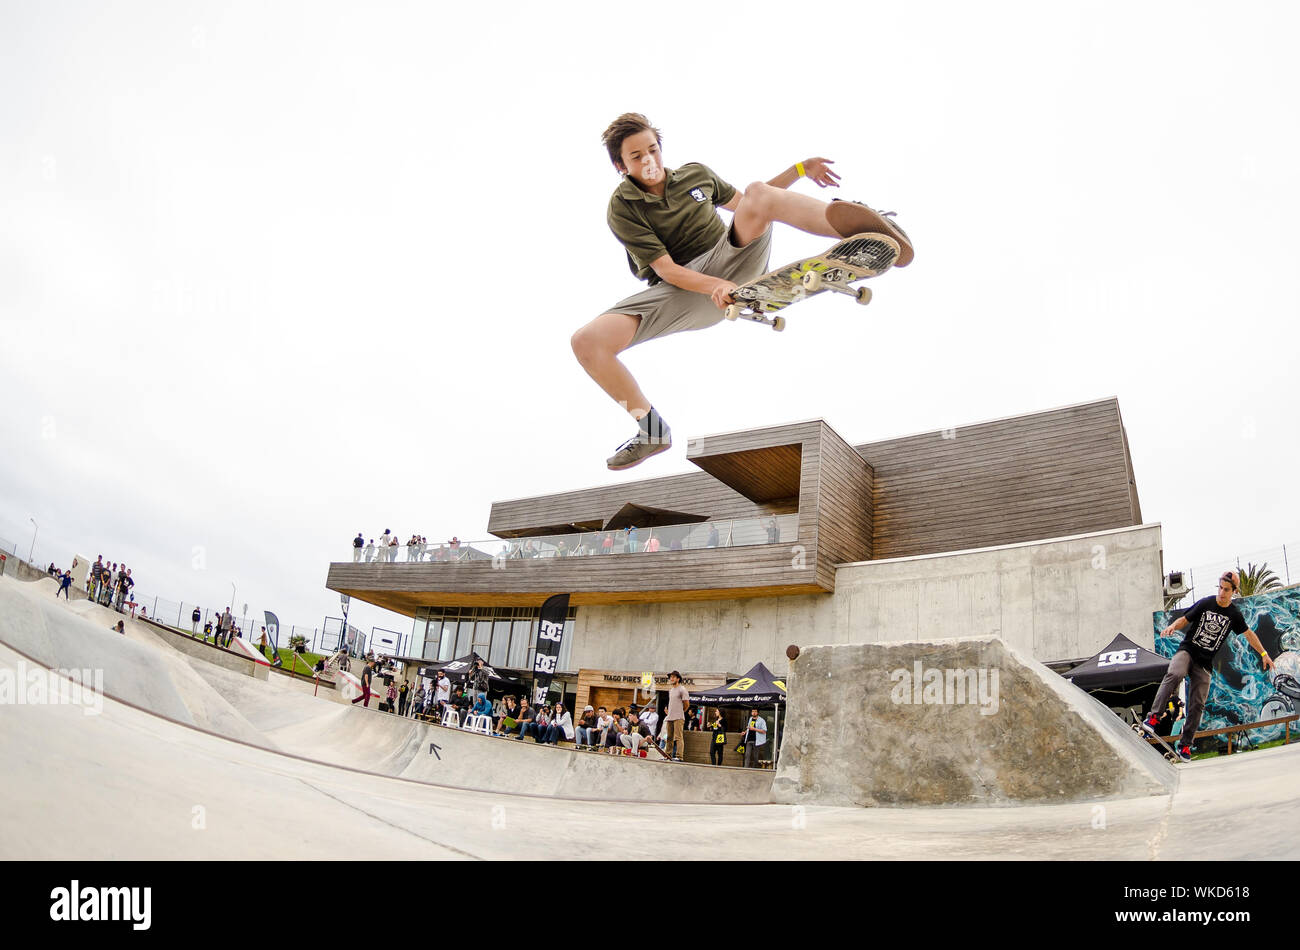 ERICEIRA, PORTUGAL - MAY 10 2014: Miguel Pinto during the DC King of the Park. Stock Photo